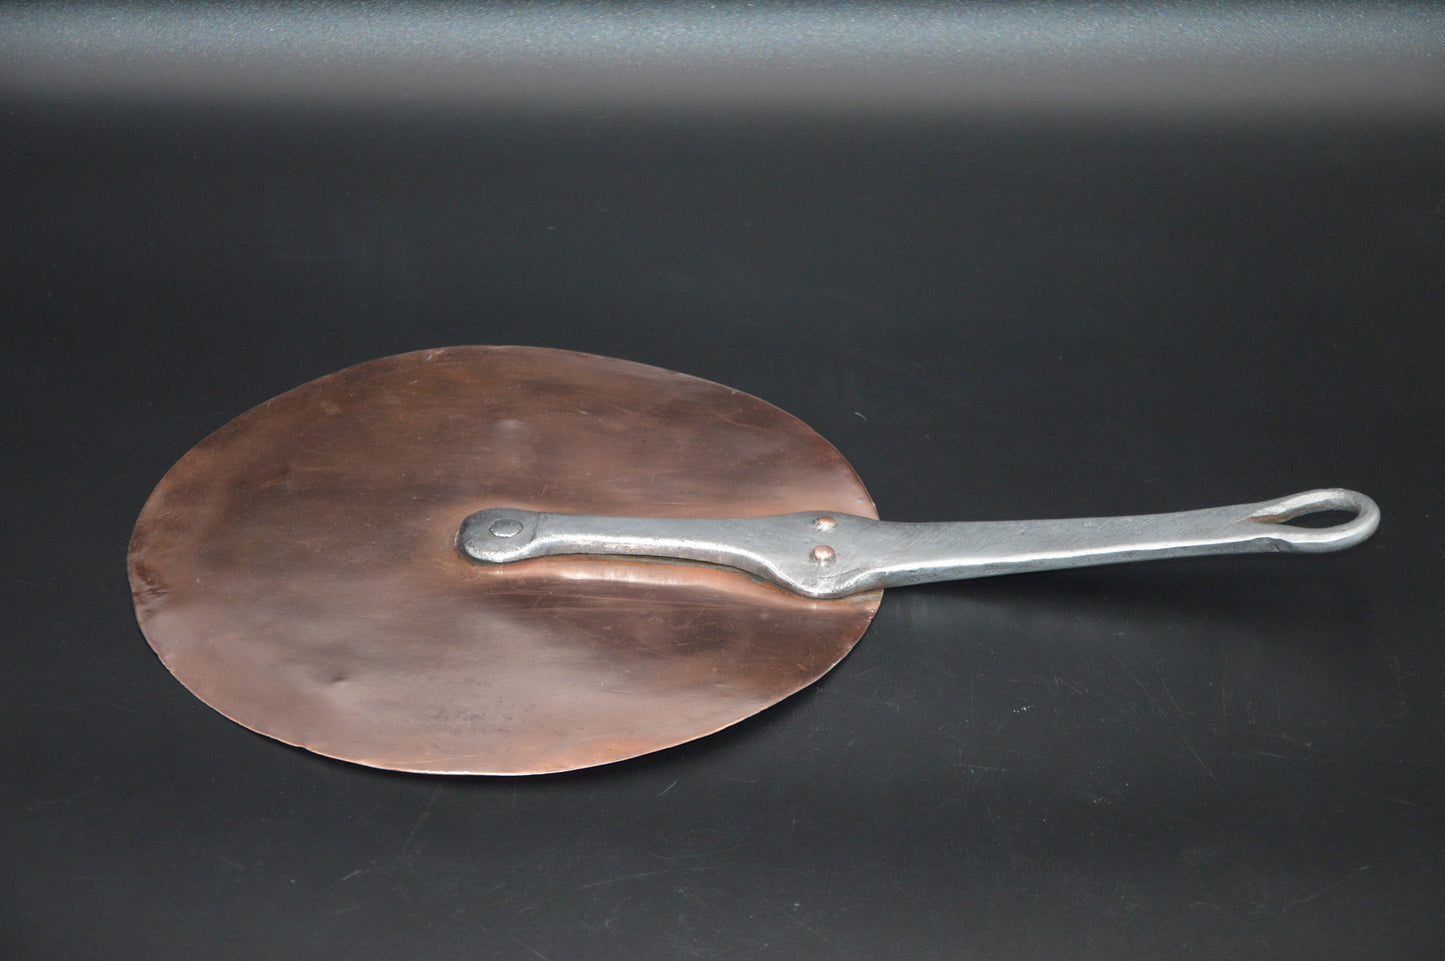 Stick Lid Antique French Hammered Copper 23.7cm 9 1/4" New Tin 748 grams 1lb 10.4 oz Splash Lid Copper Rivets Forged Iron Handle